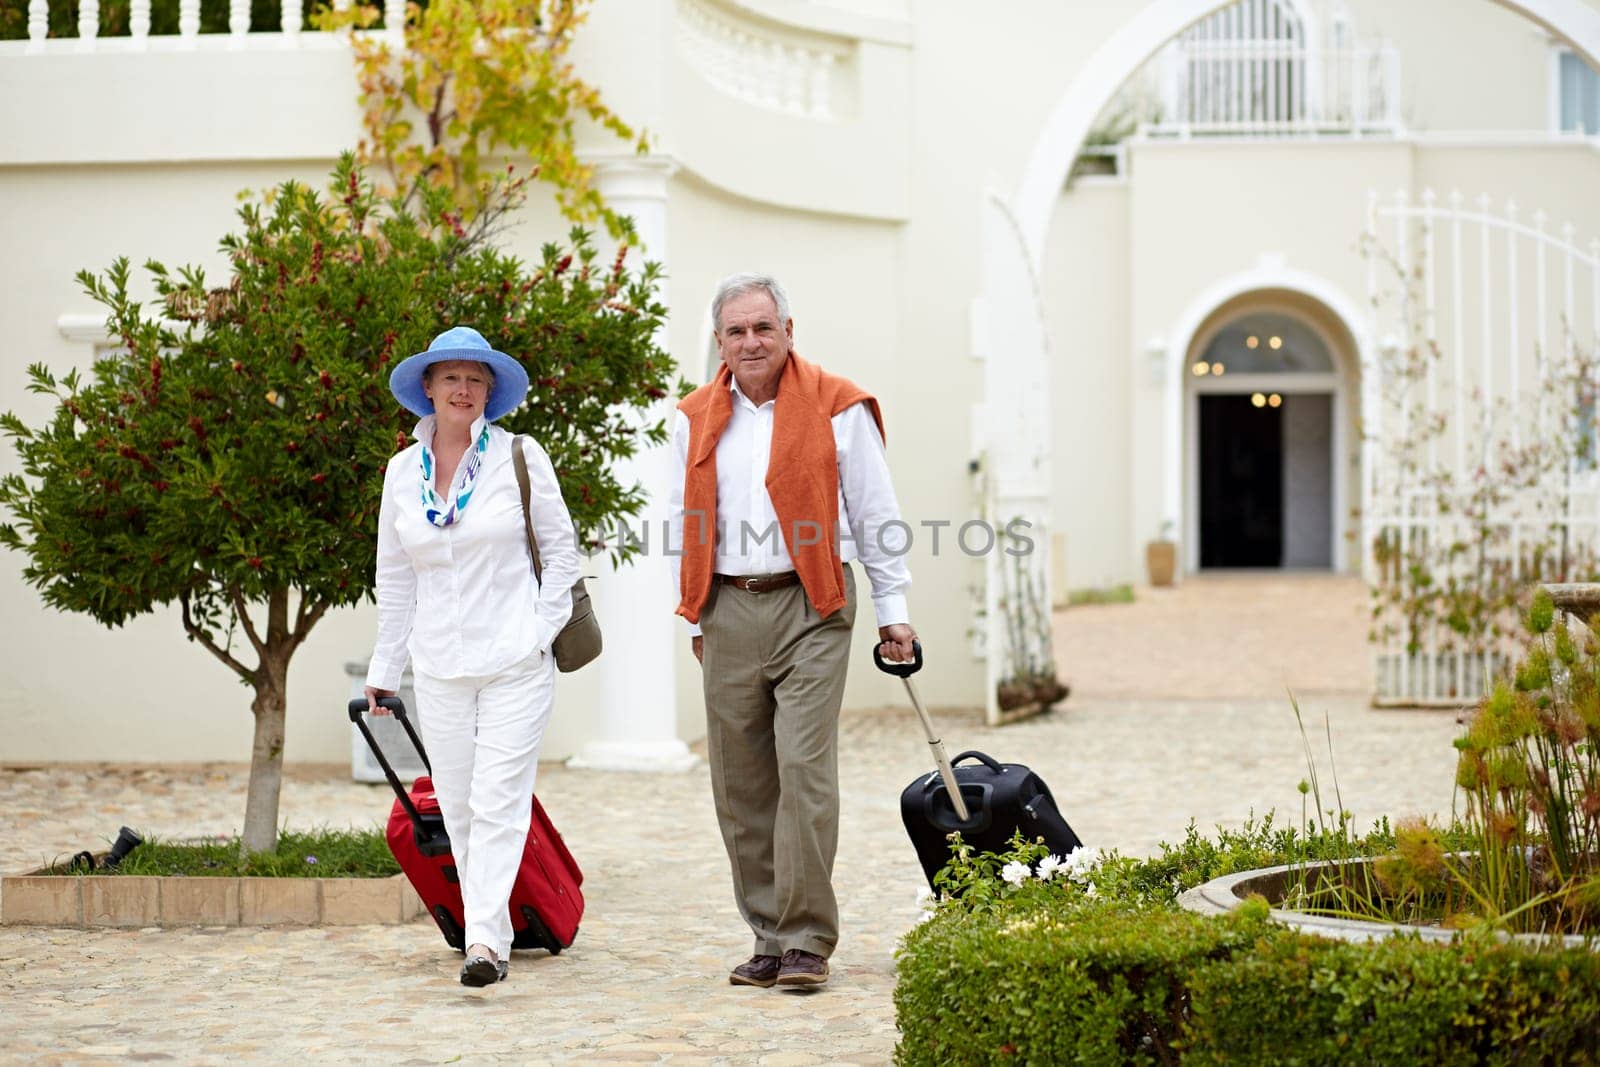 Hotel, vacation and elderly couple walking with suitcase in a holiday location happy in retirement and travel together. Bag, smile and senior people on a journey or man and woman walk in happiness.